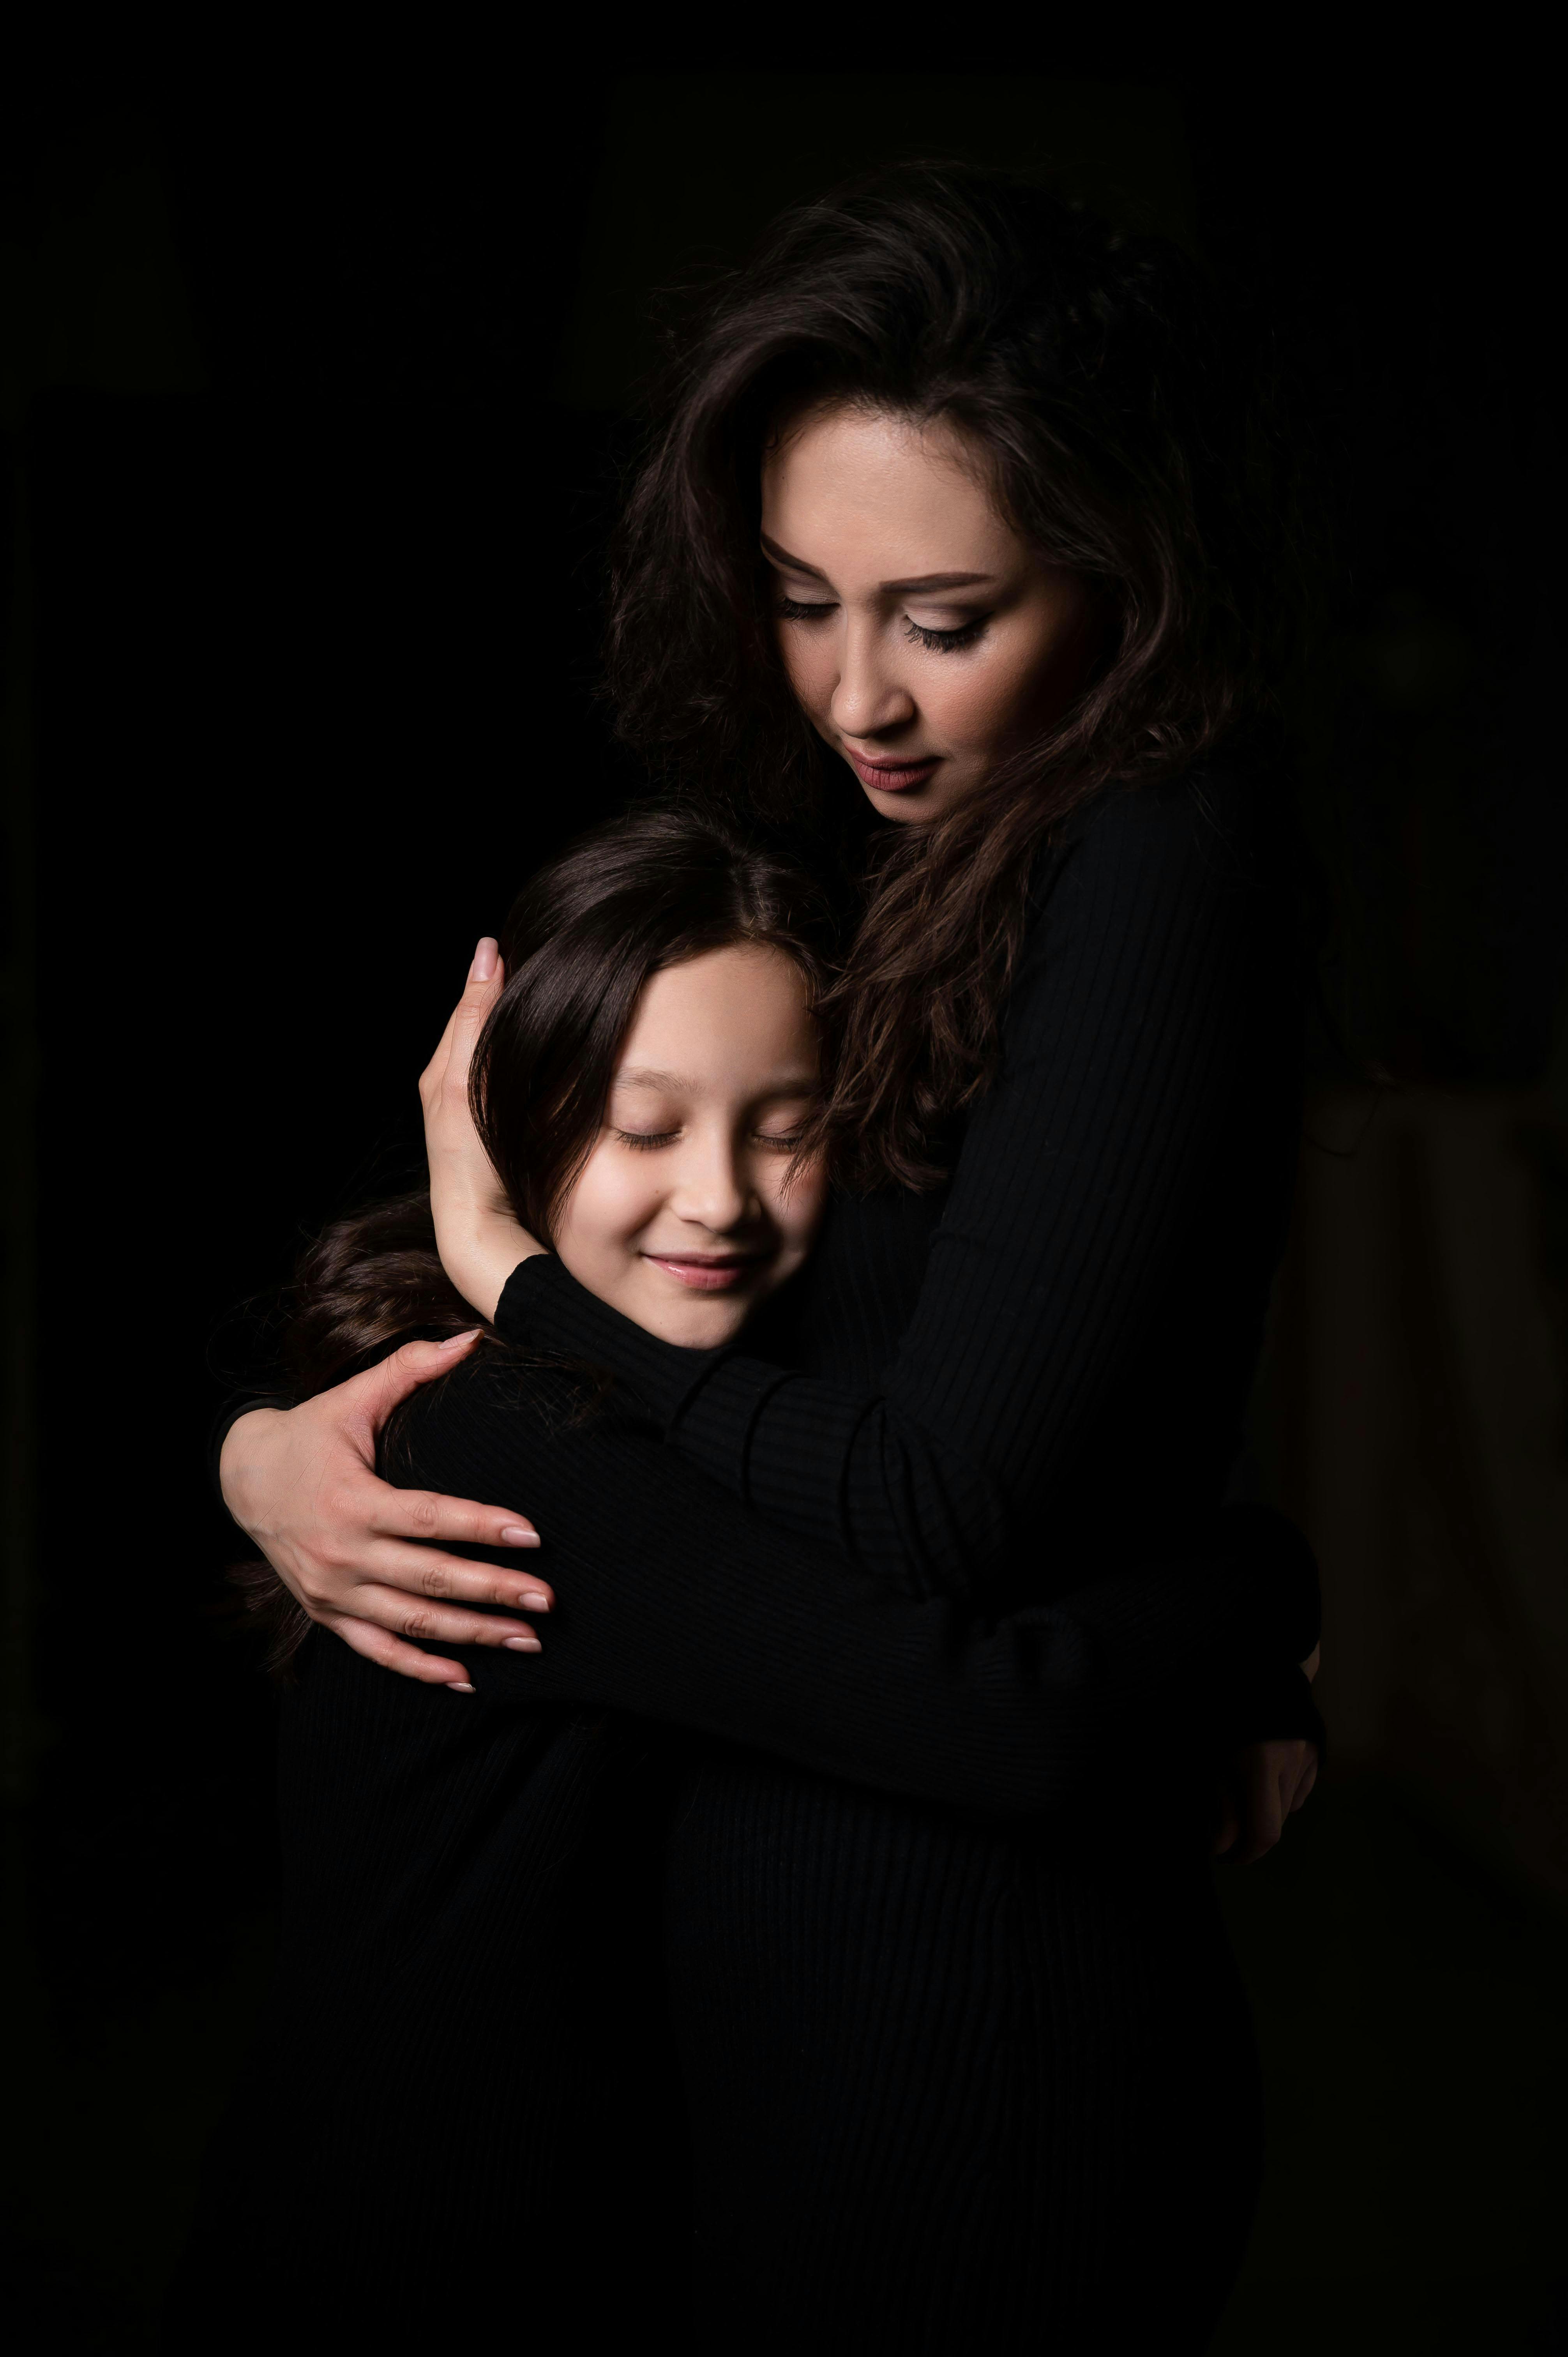 A proud woman embracing her daughter | Source: Pexels